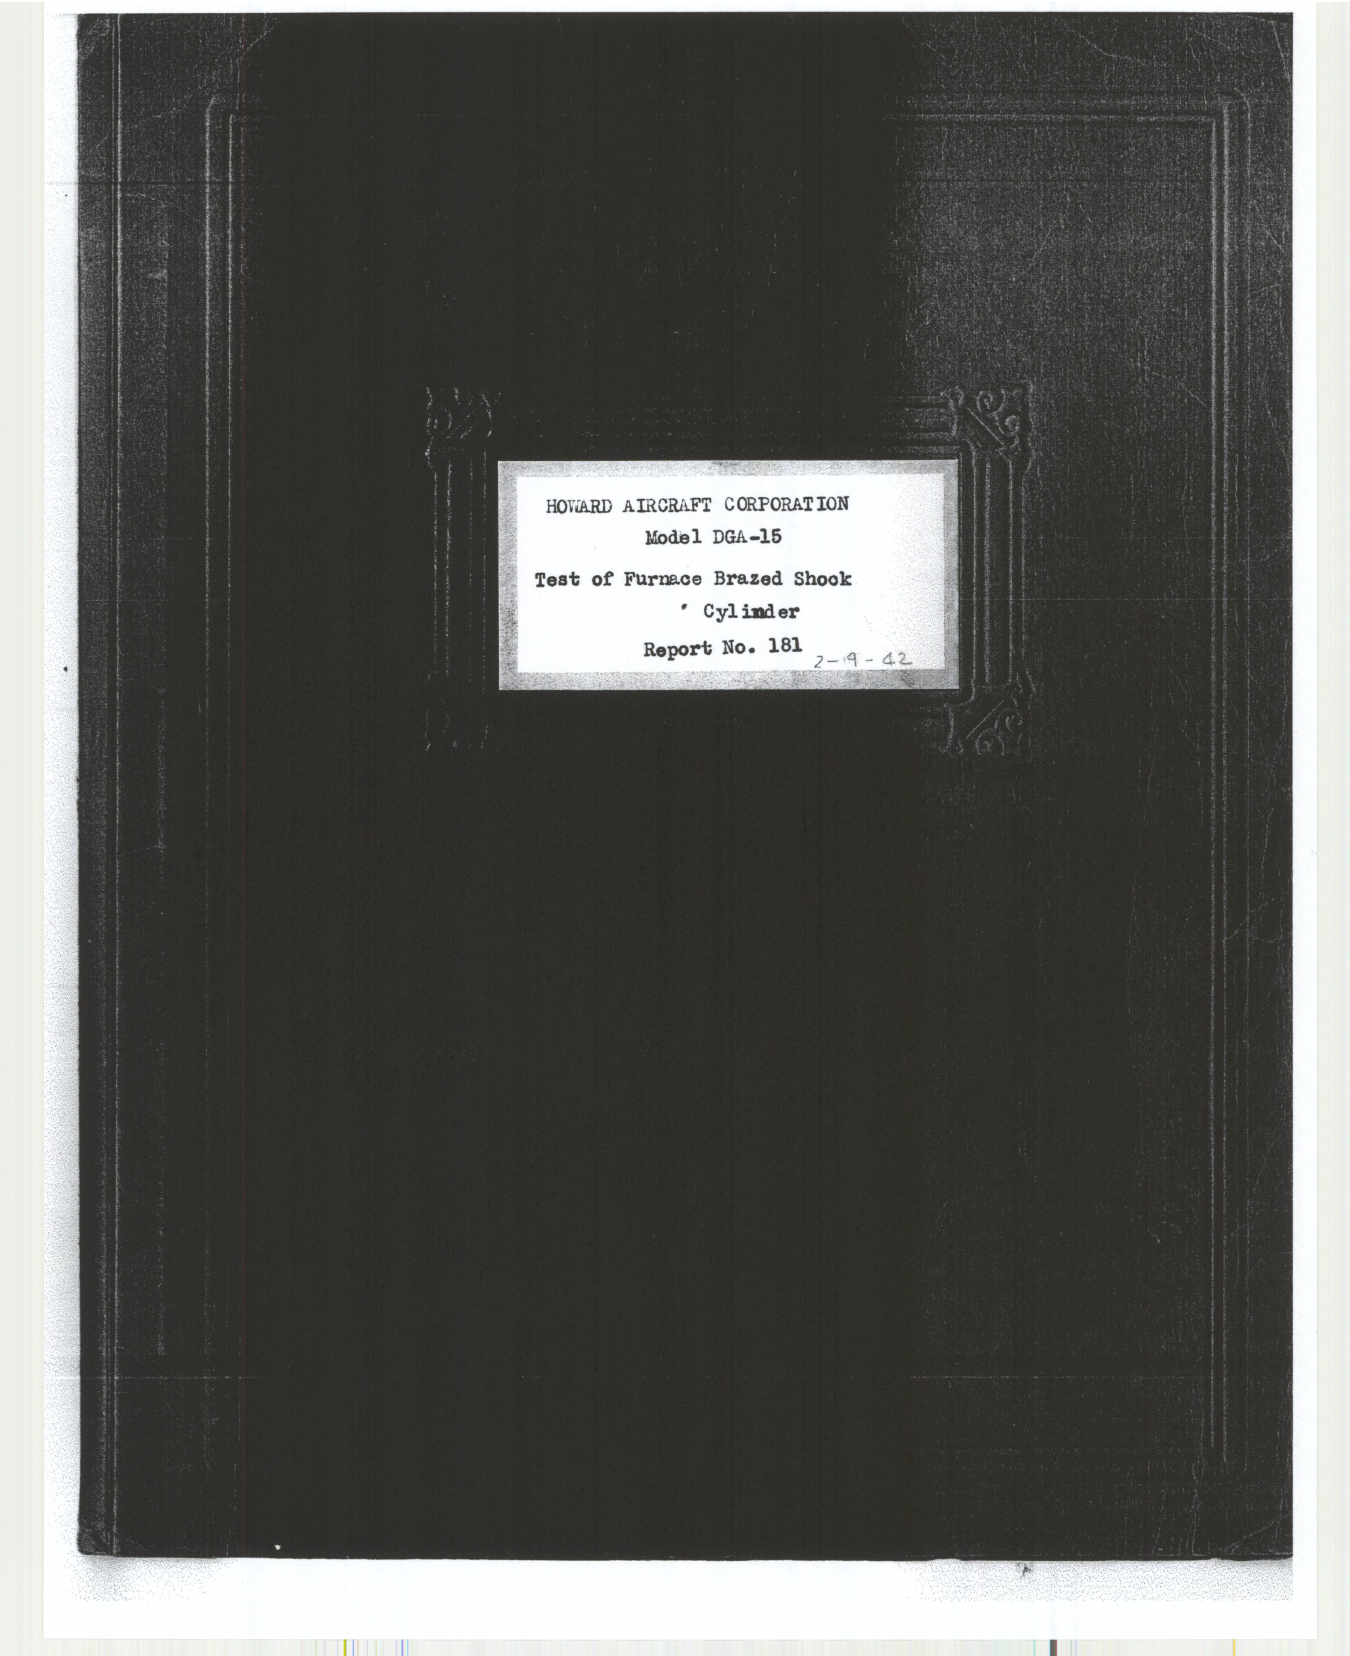 Sample page 1 from AirCorps Library document: Report 181, Test of Furnace Brazed Shock Cylinder, DGA-15